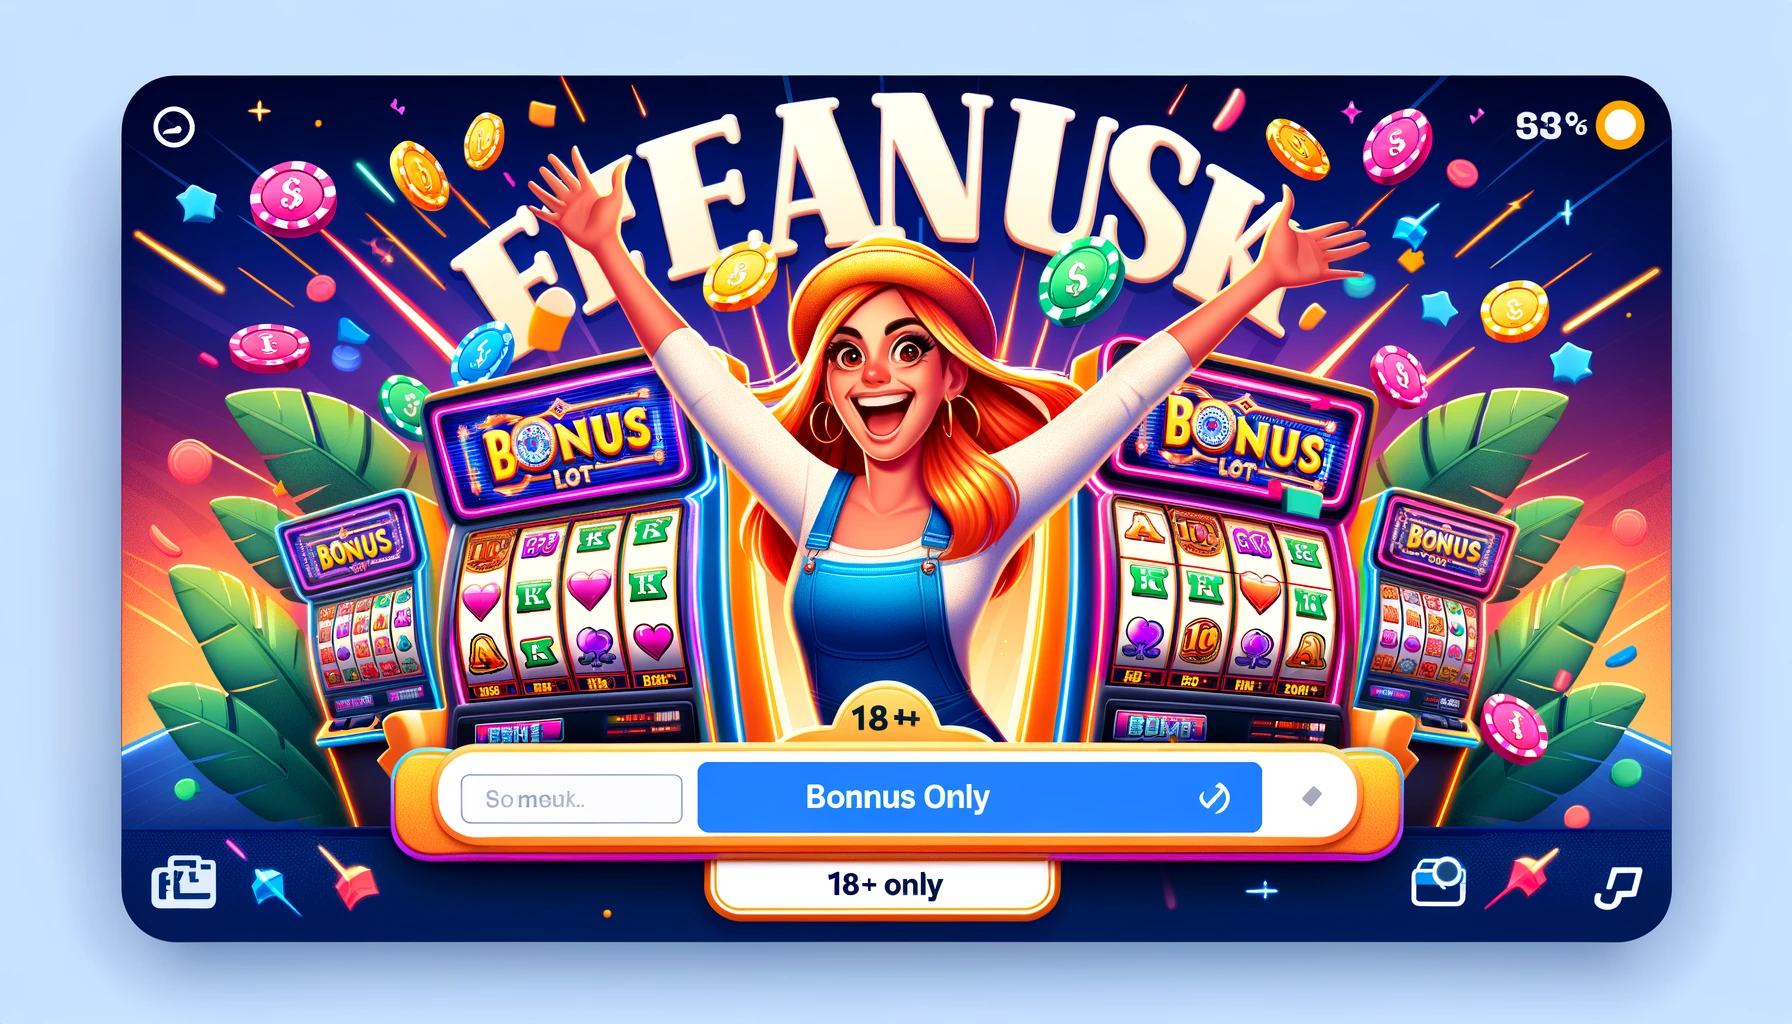 About Online Casino Slots - What are the main casino games?